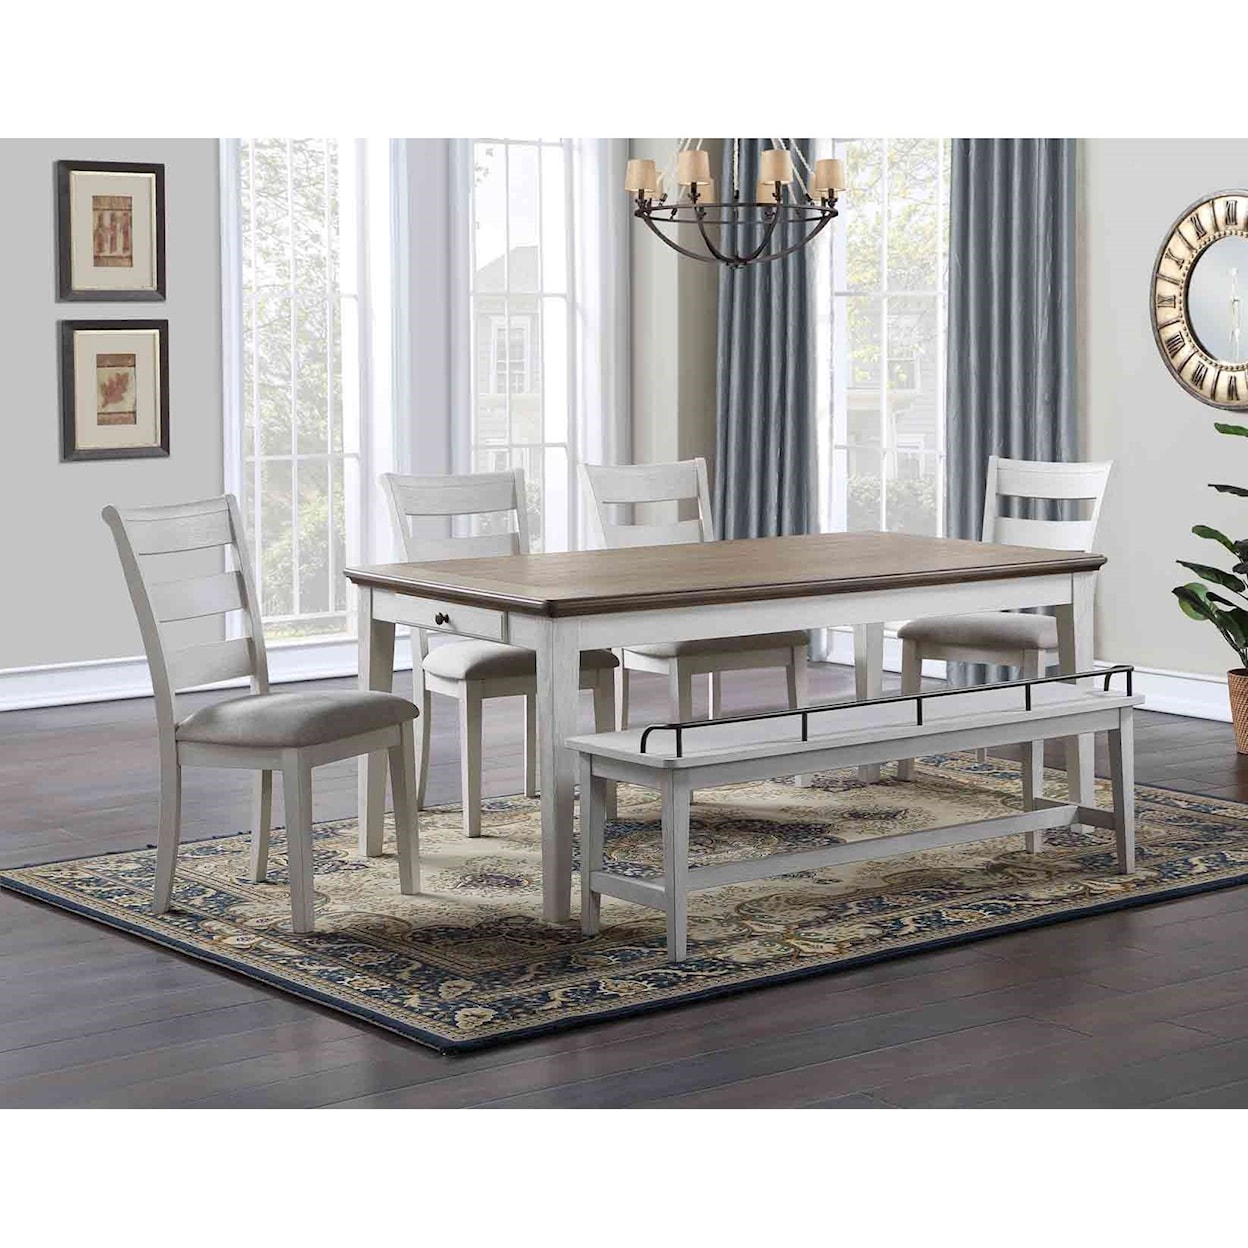 Steve Silver Pendleton 6-Piece Formal Dining Set with Bench 